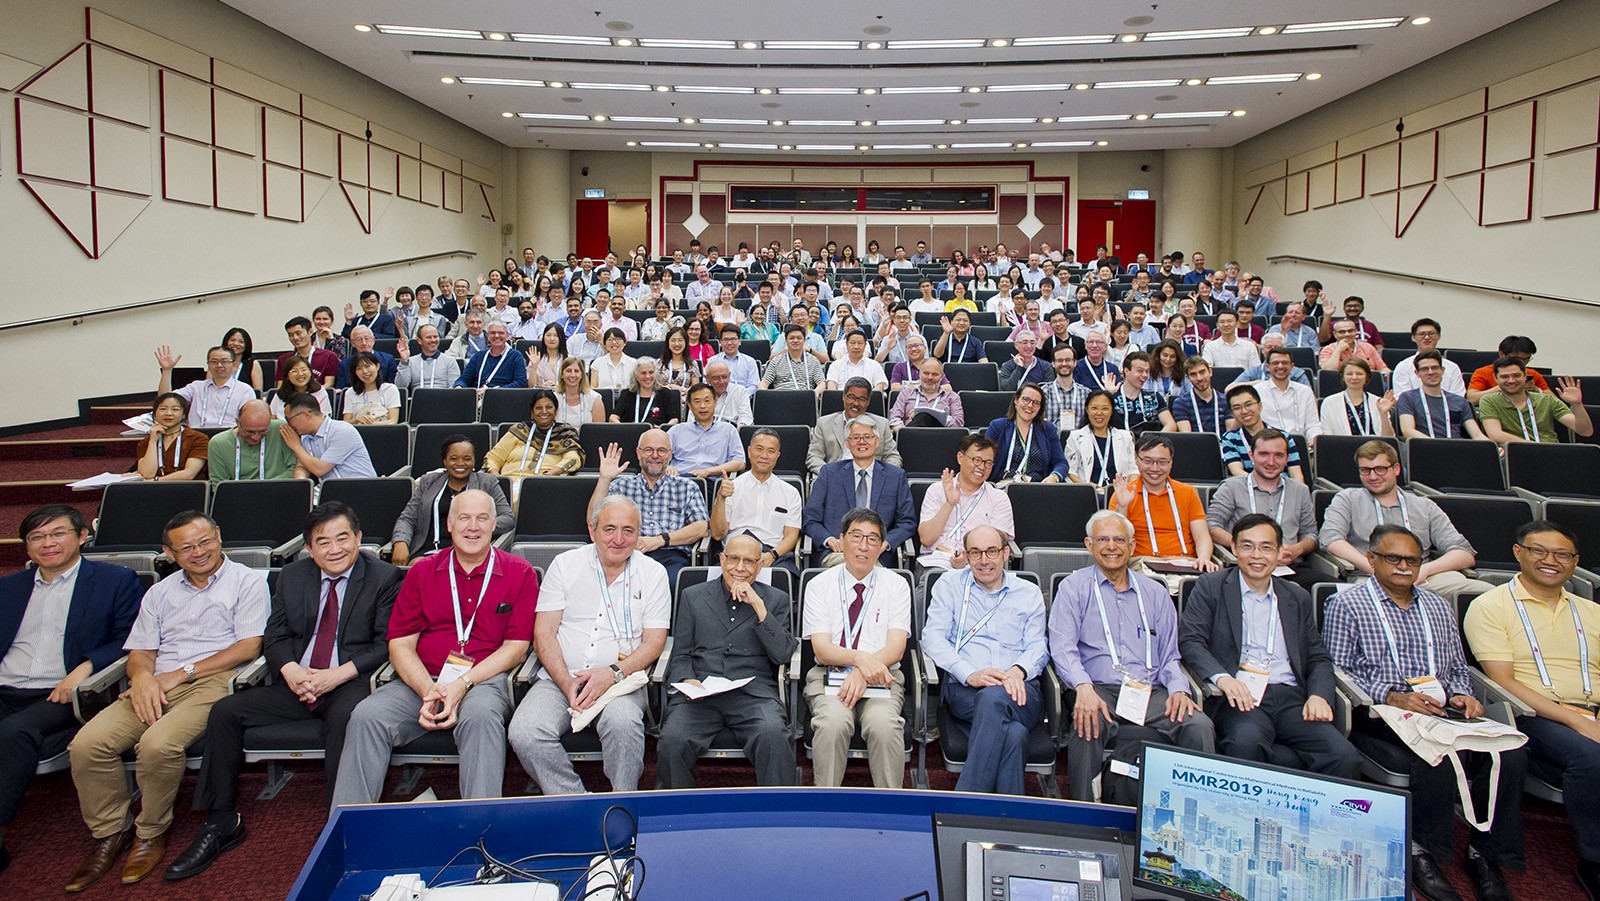 The 11th International Conference on Mathematical Methods in Reliability is being held from 3 to 7 June at CityU.